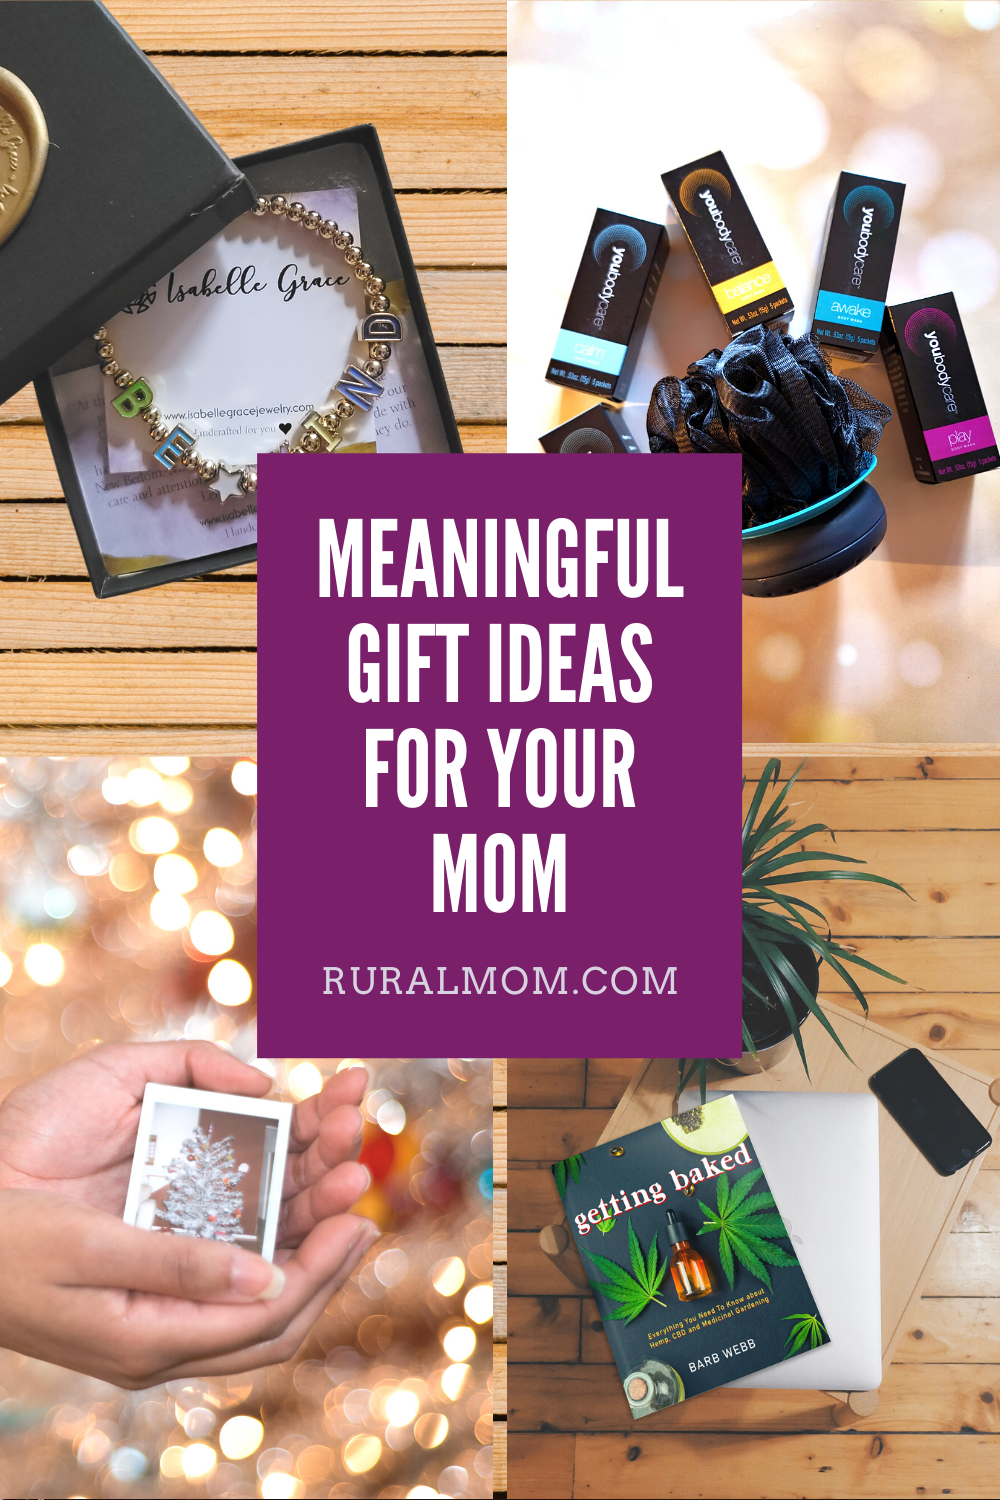 https://ruralmom.com/wp-content/uploads/2021/11/Meaningful-Gift-Ideas-for-Your-Mom.png